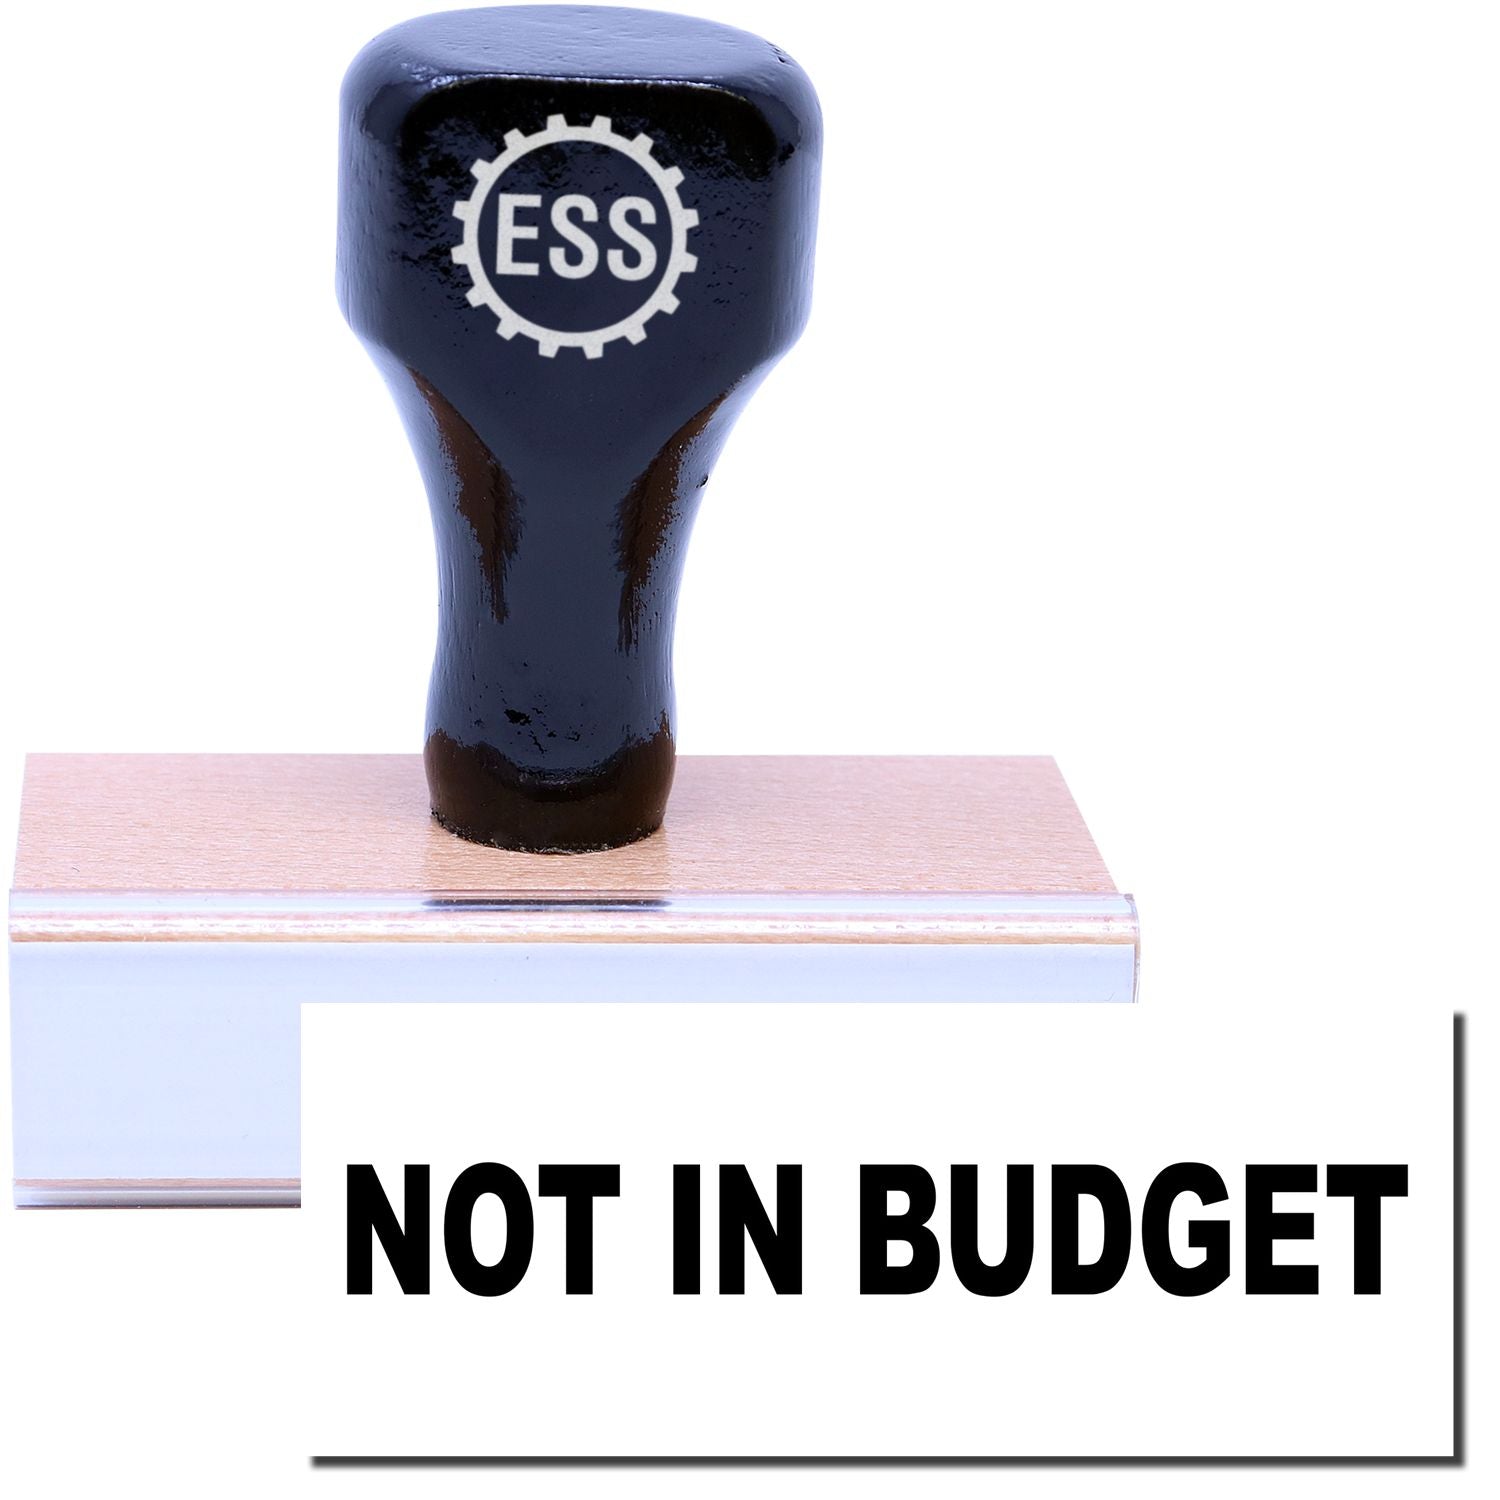 A stock office rubber stamp with a stamped image showing how the text "NOT IN BUDGET" is displayed after stamping.